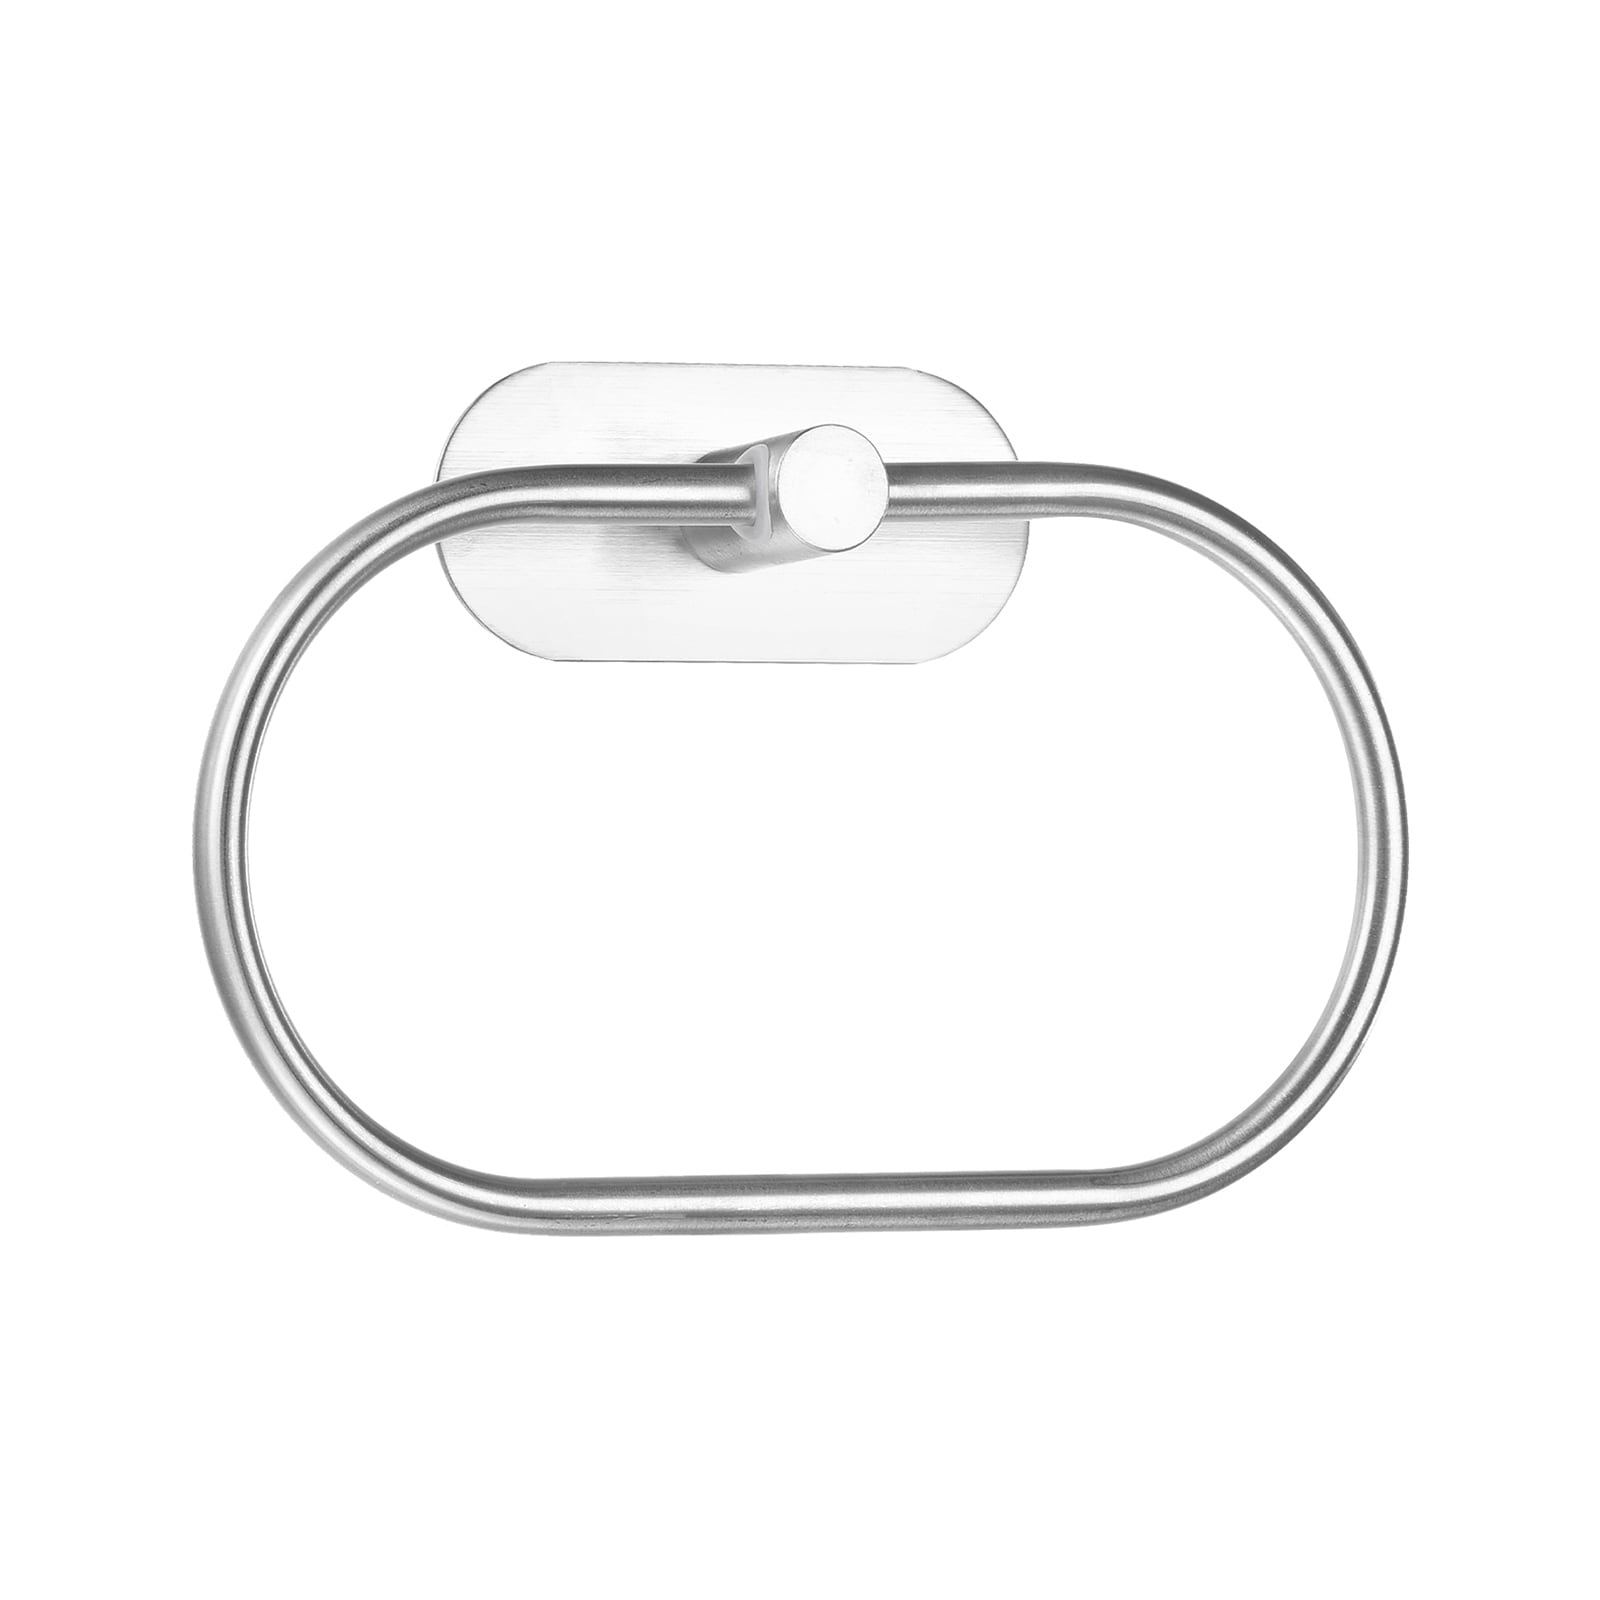 Self Adhesive Towel Ring Wall Mounted Oval Towel Hanger Holder, 1Pcs - On  Sale - Bed Bath & Beyond - 37034944